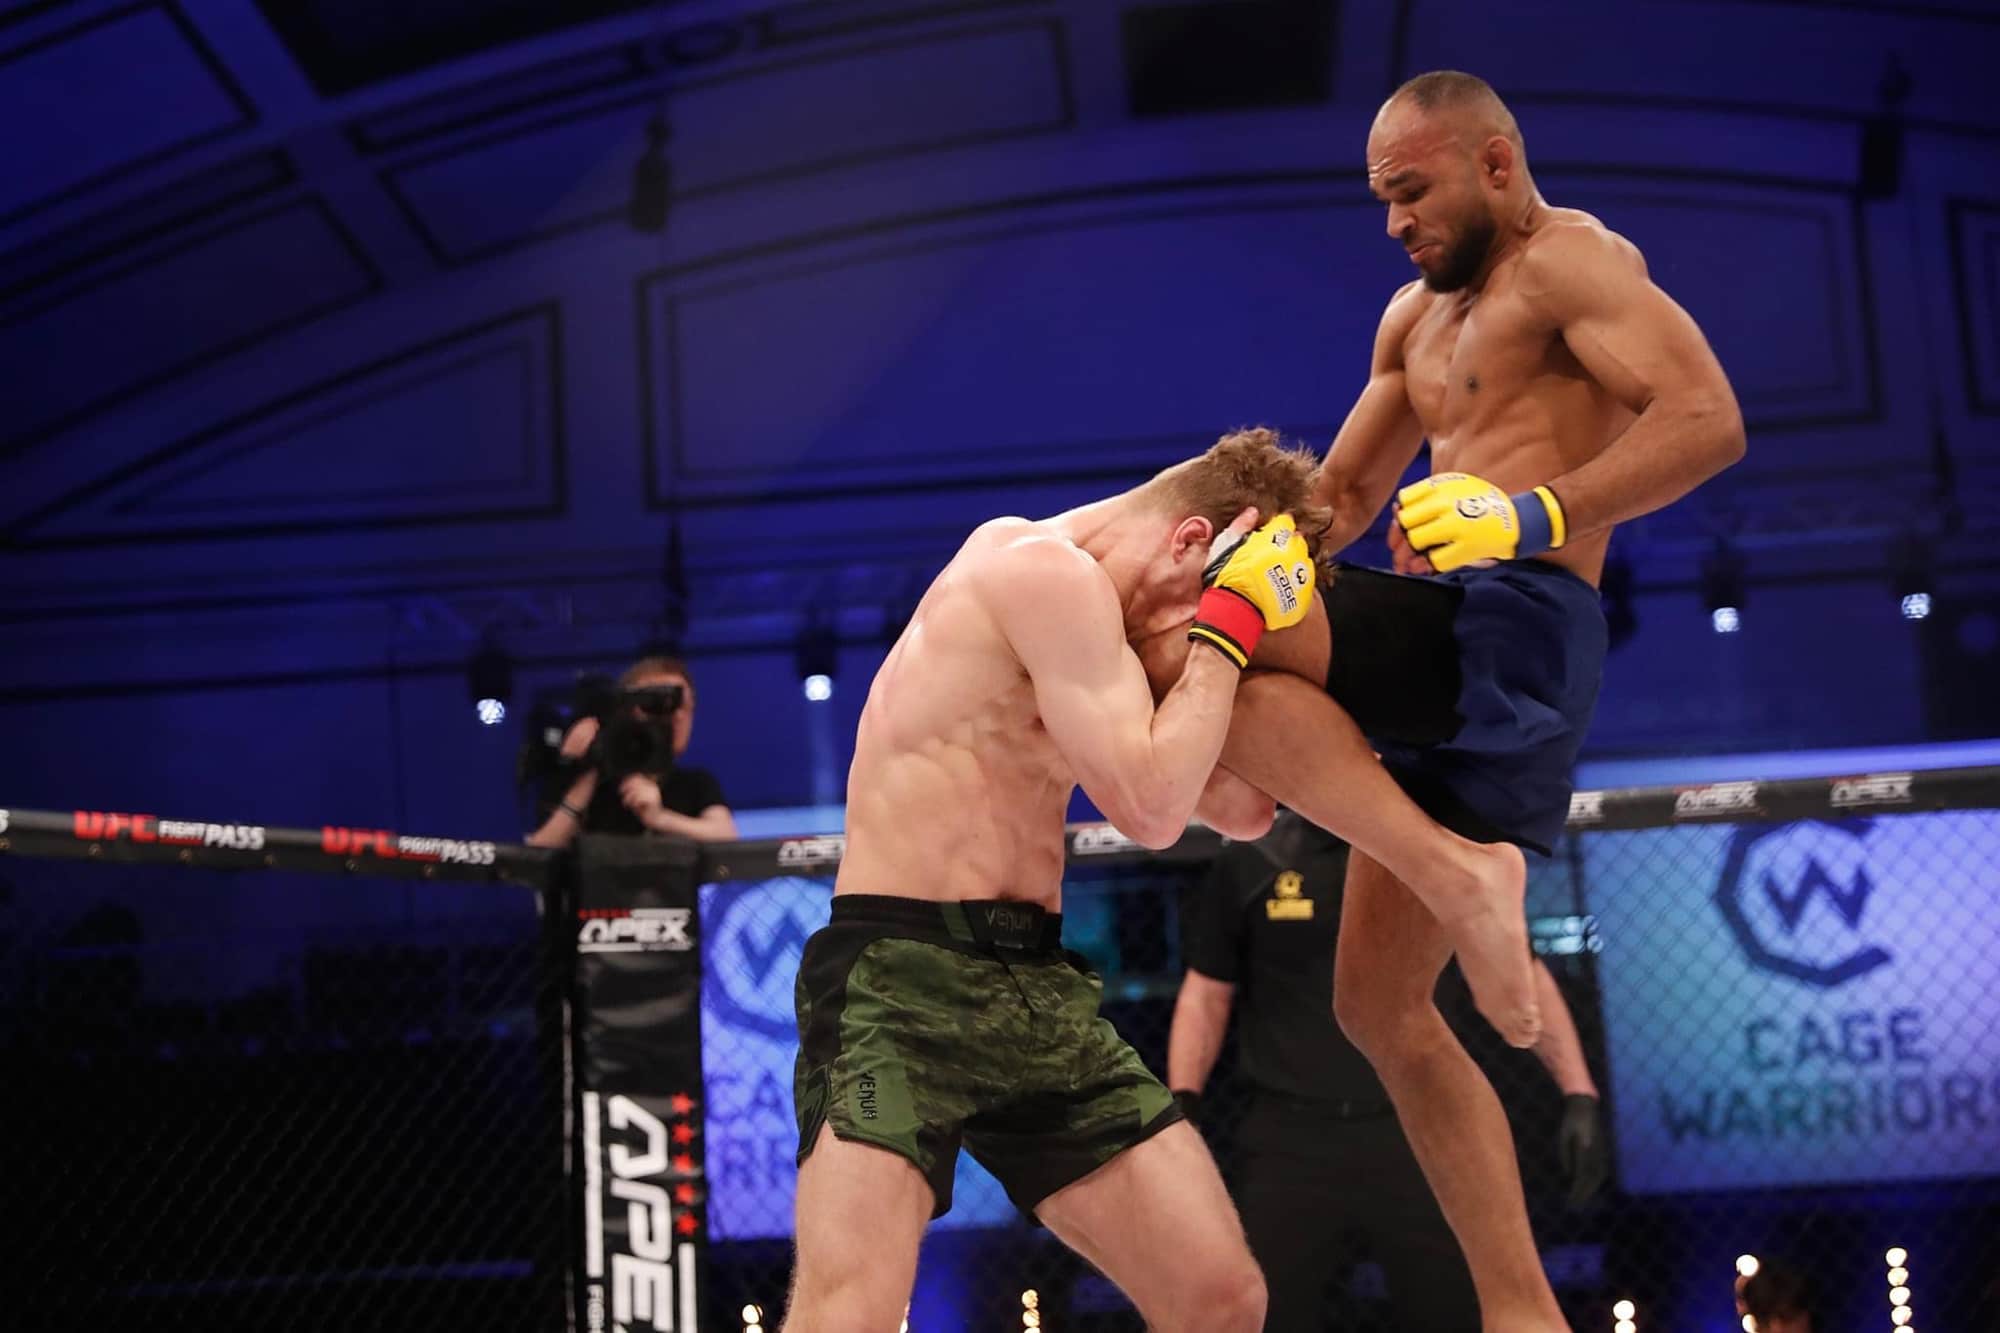 IMMAF Alumni Christian Duncan continues win streak at Cage Warriors